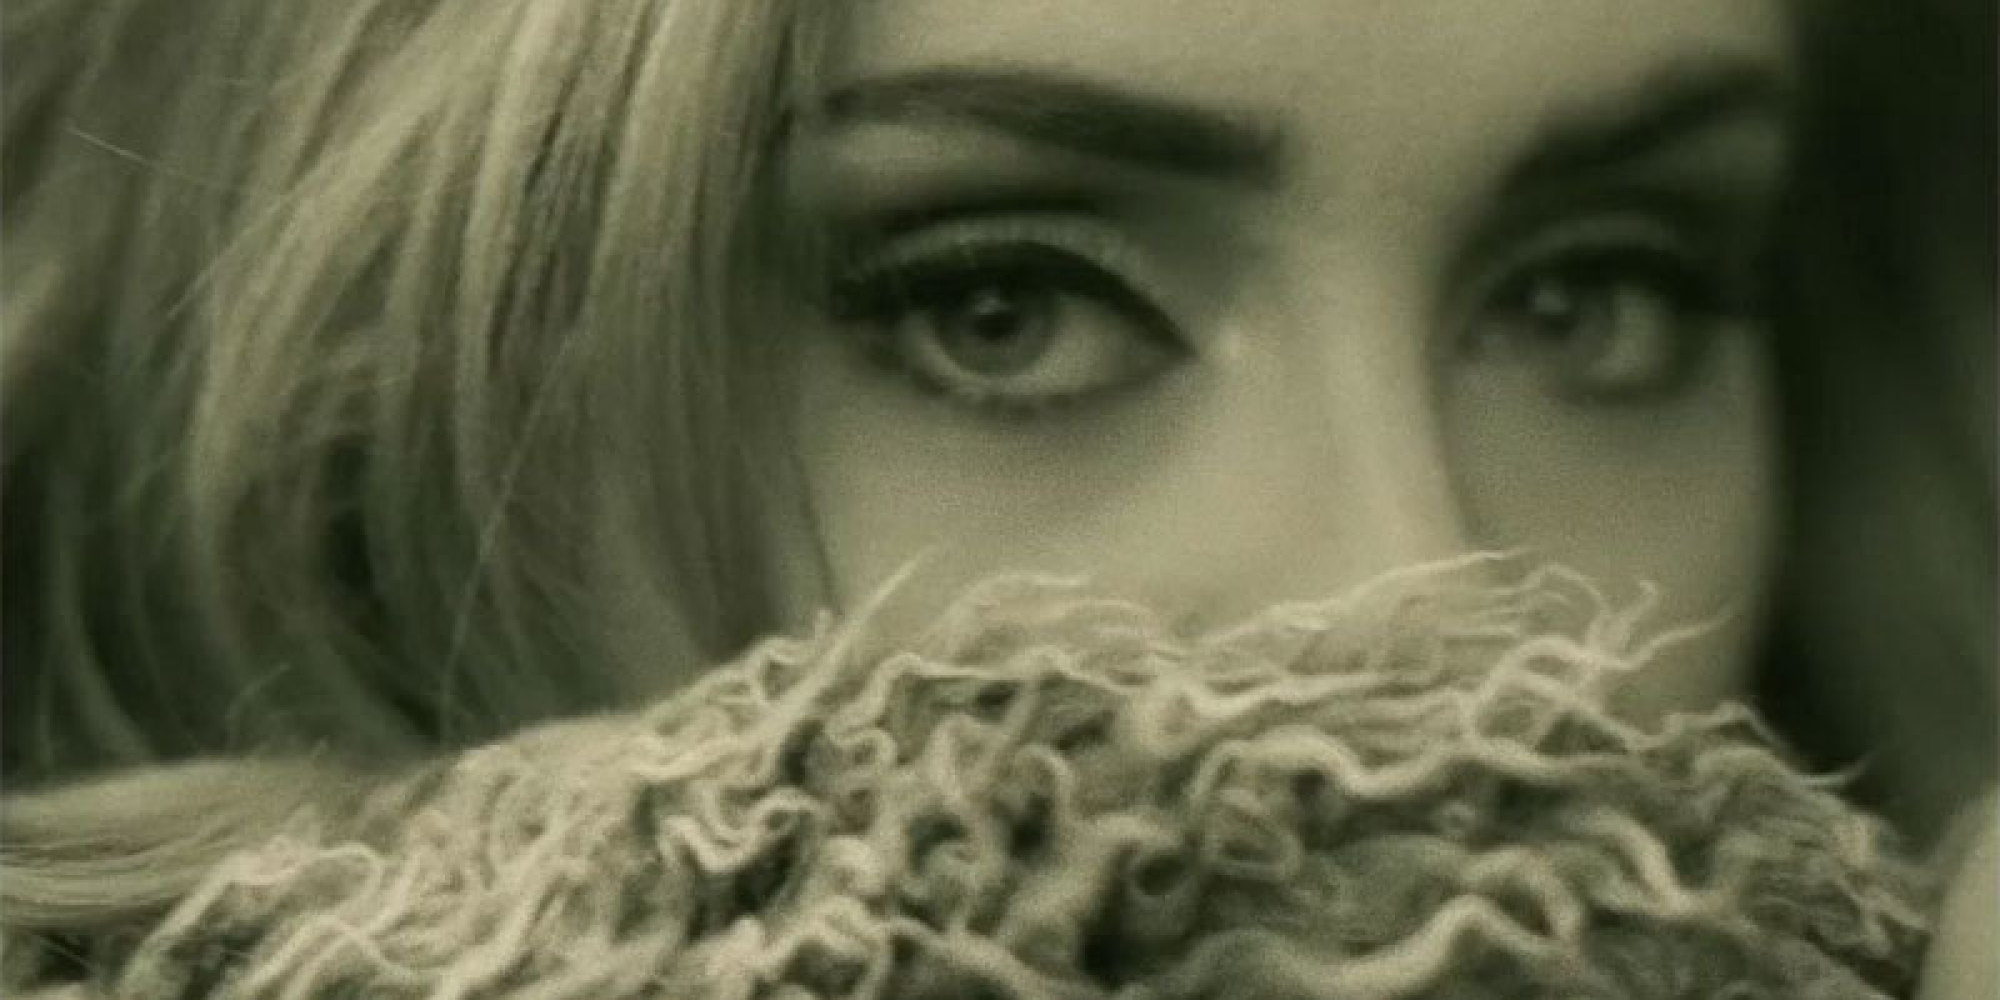 Adele's â€˜Hello' Video Has Just Been Unveiled And It's STUNNING